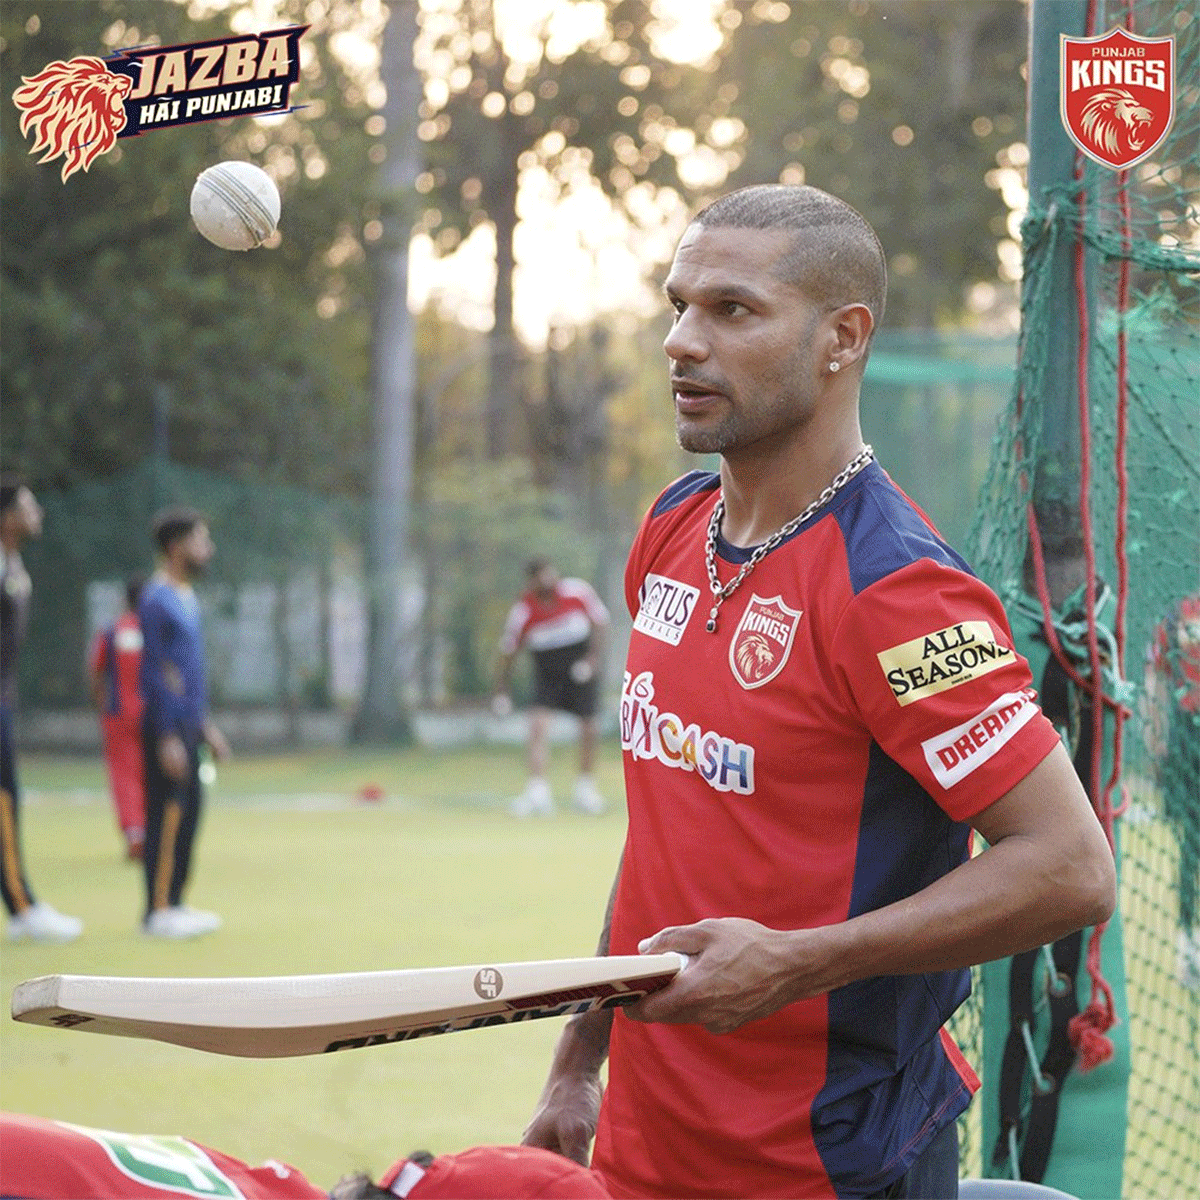 Punjab Kings captain Shikhar Dhawan has been a consistent performer in the Indian Premier League over the years